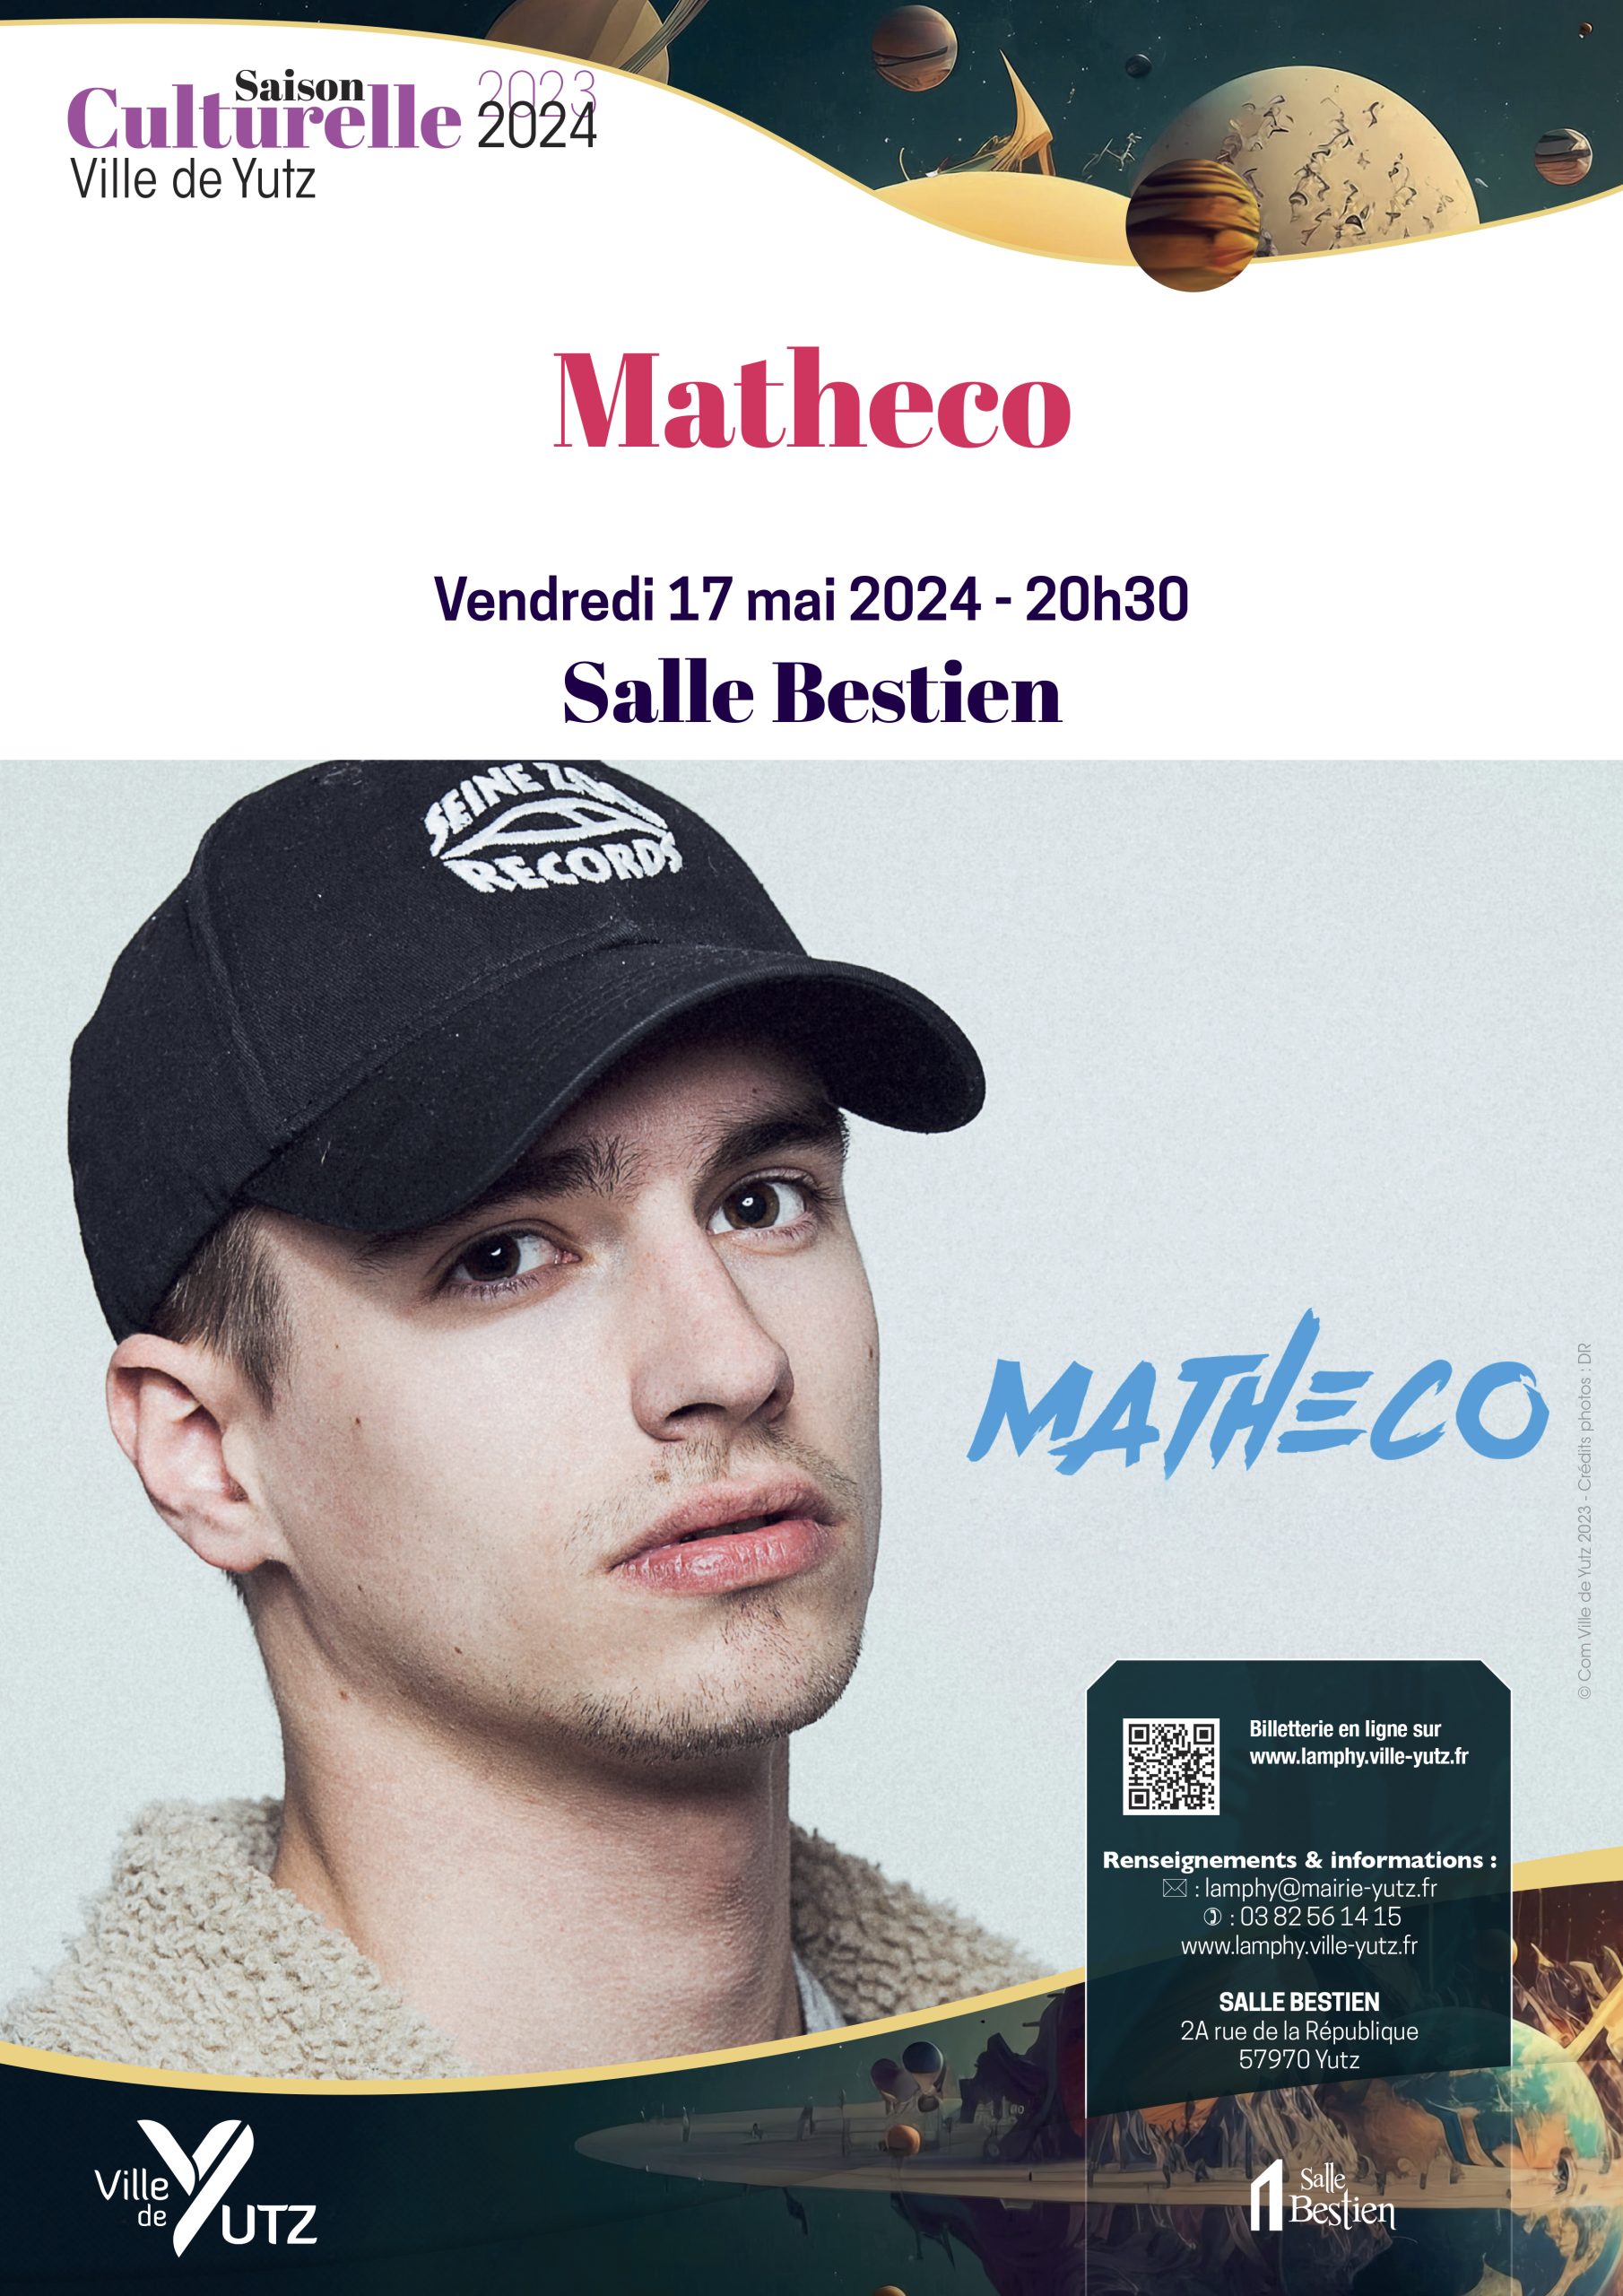 Comedy show: Matheco – Everything is normal